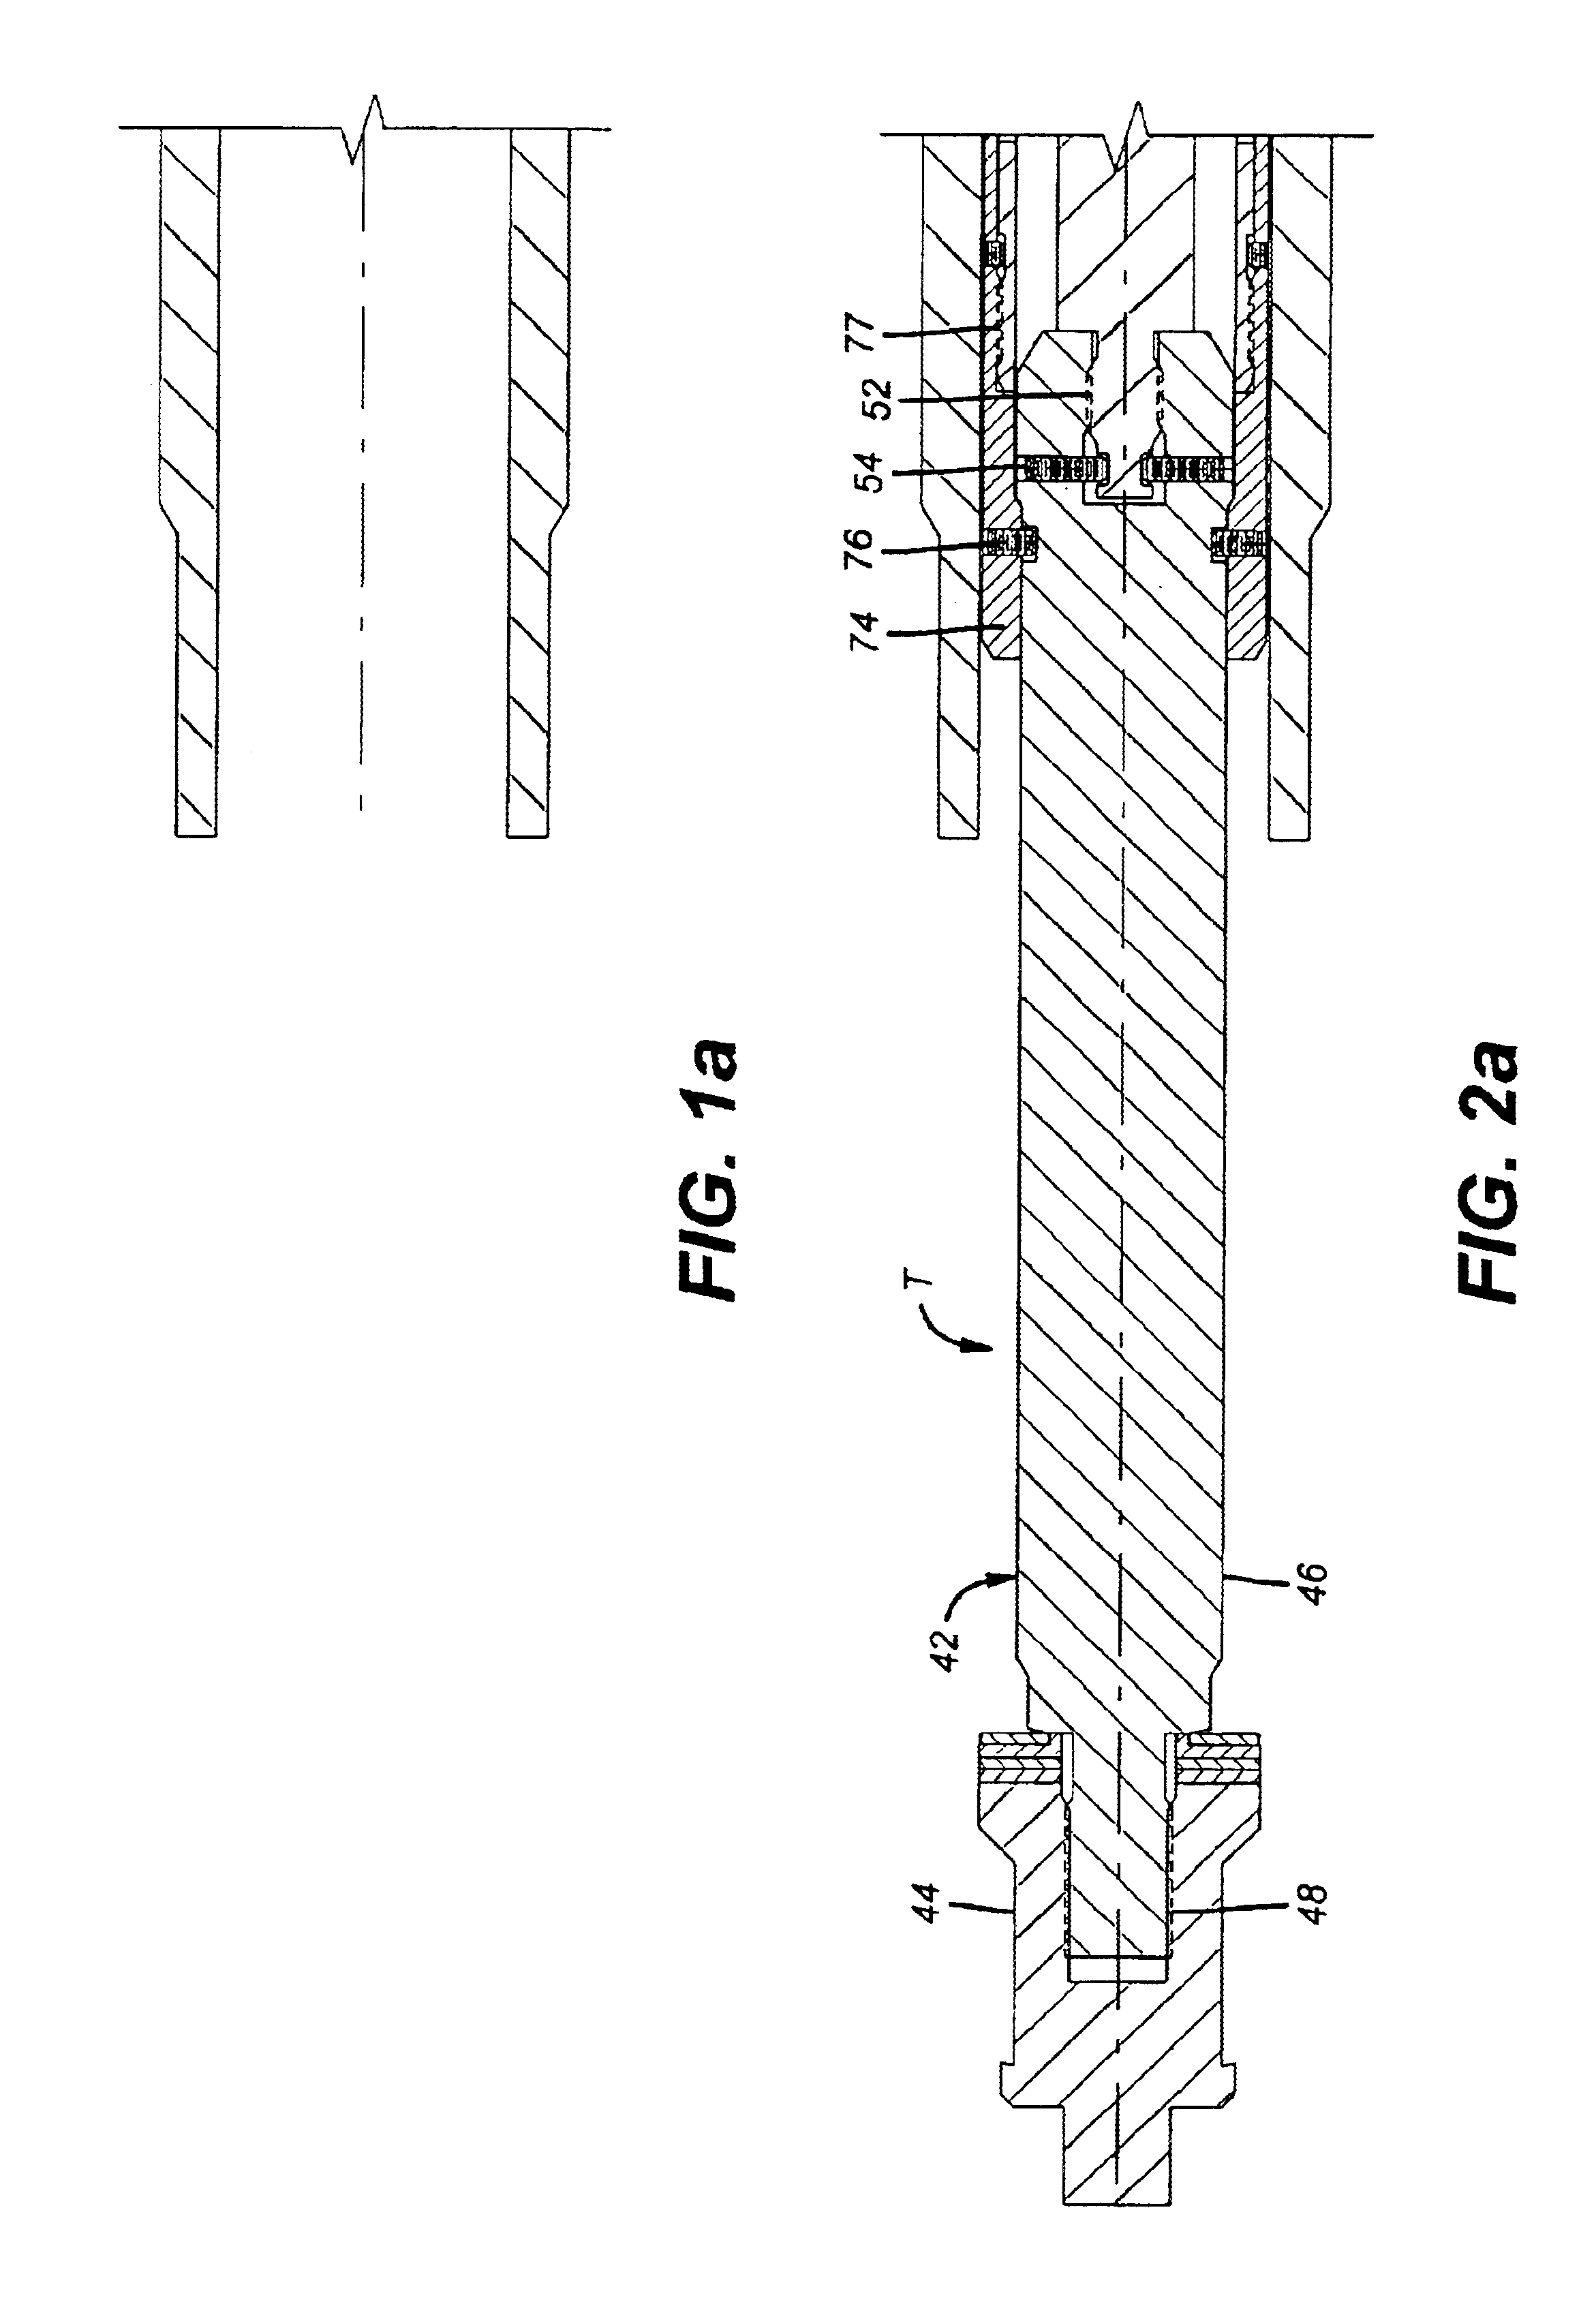 Lock open and control system access apparatus and method for a downhole safety valve